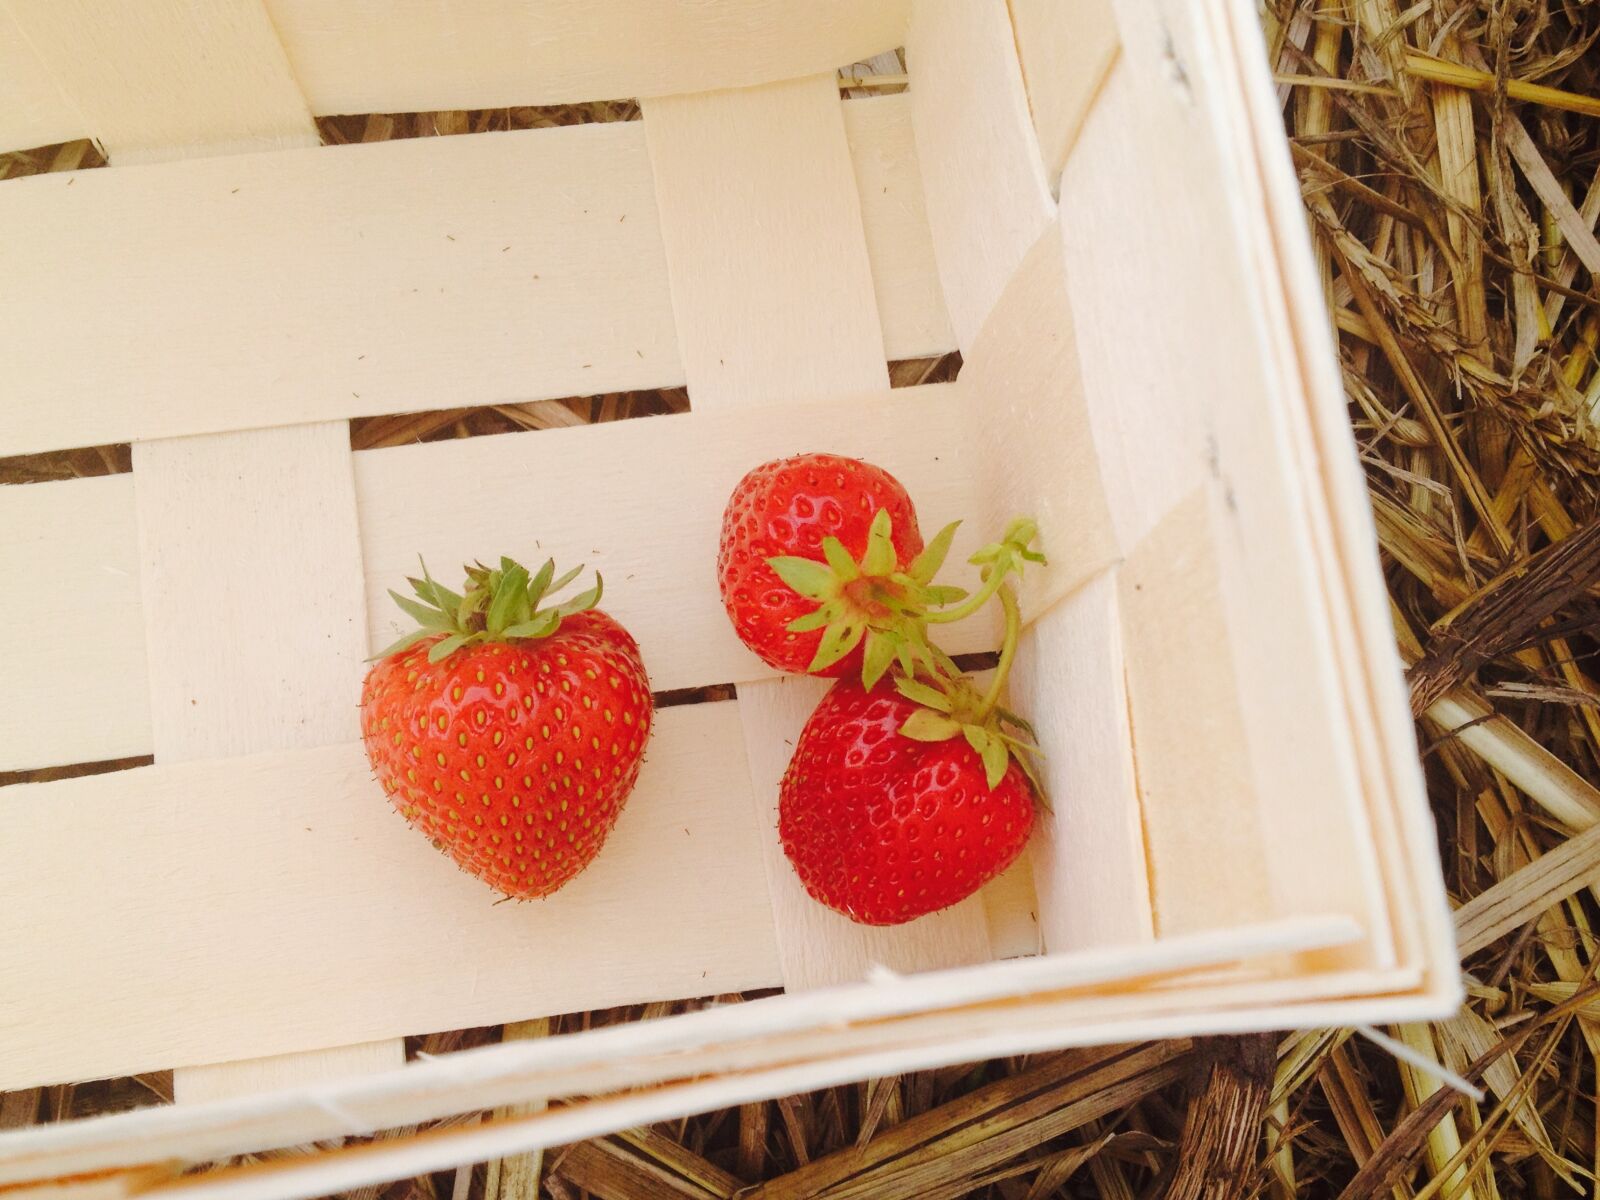 Apple iPhone 4S sample photo. Strawberries, strawberry field, strawberry photography